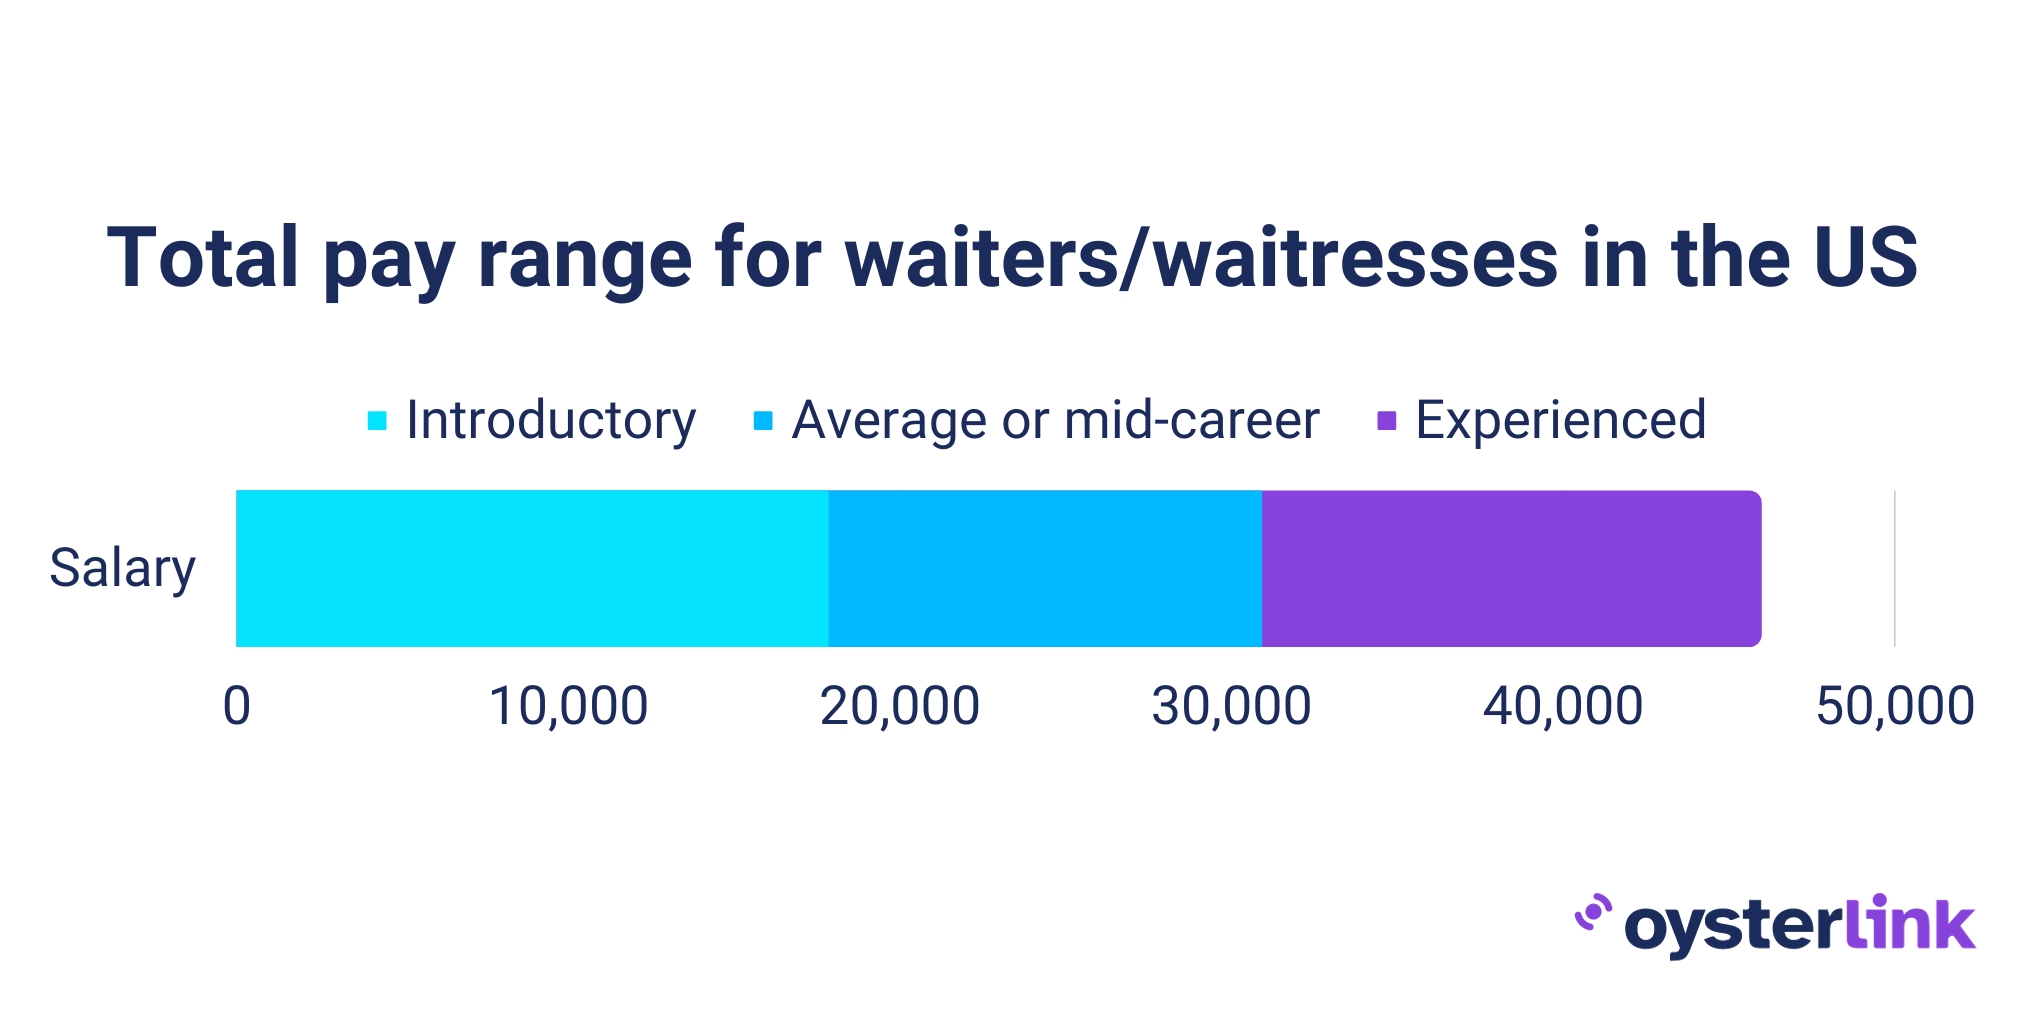 Total pay range for waiters/waitresses in the U..S.